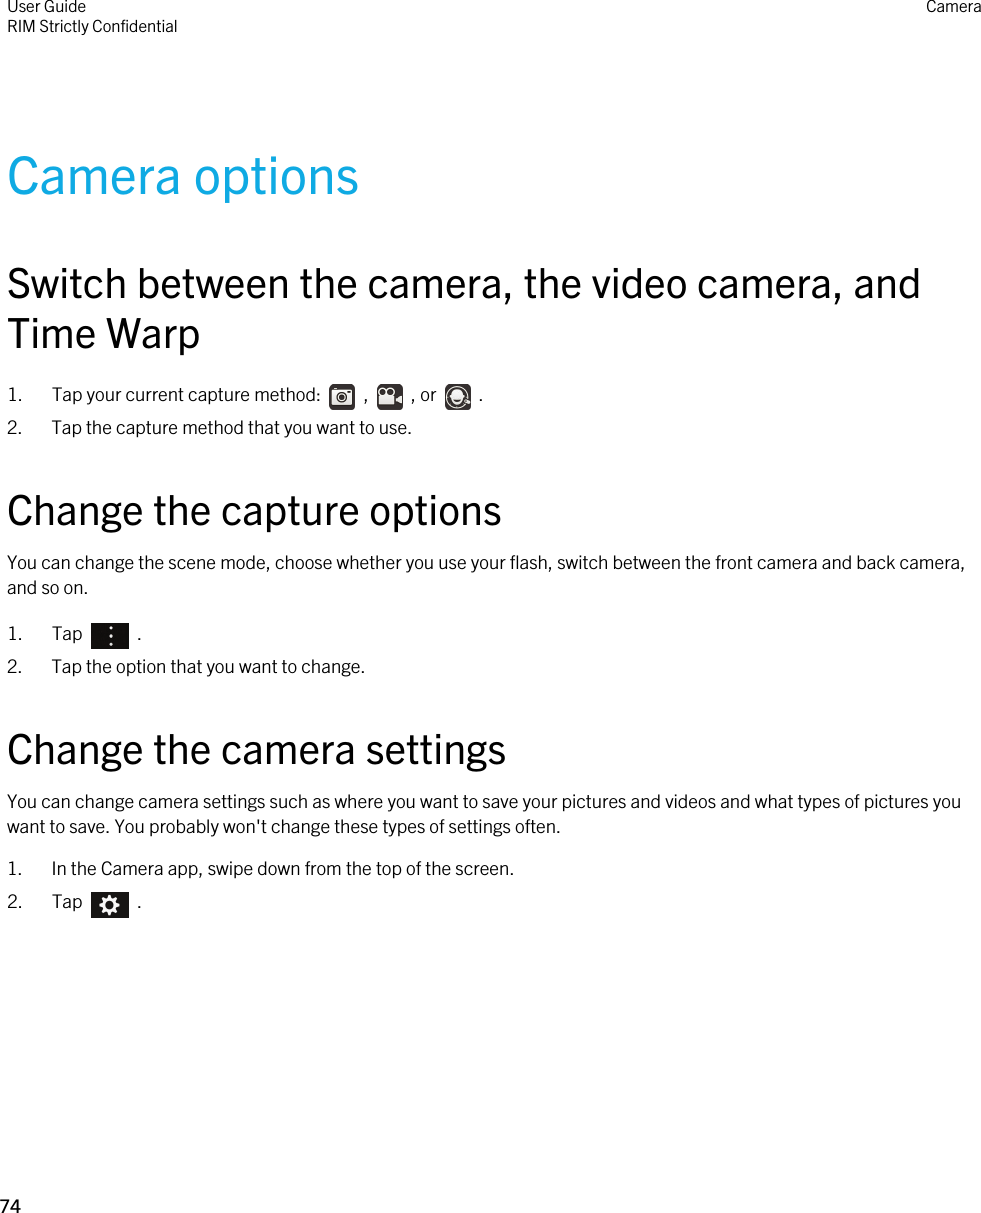 Camera optionsSwitch between the camera, the video camera, and Time Warp1.  Tap your current capture method:    ,    , or    .2. Tap the capture method that you want to use.Change the capture optionsYou can change the scene mode, choose whether you use your flash, switch between the front camera and back camera, and so on.1.  Tap    .2. Tap the option that you want to change.Change the camera settingsYou can change camera settings such as where you want to save your pictures and videos and what types of pictures you want to save. You probably won&apos;t change these types of settings often.1. In the Camera app, swipe down from the top of the screen.2.  Tap    .User GuideRIM Strictly Confidential Camera74 